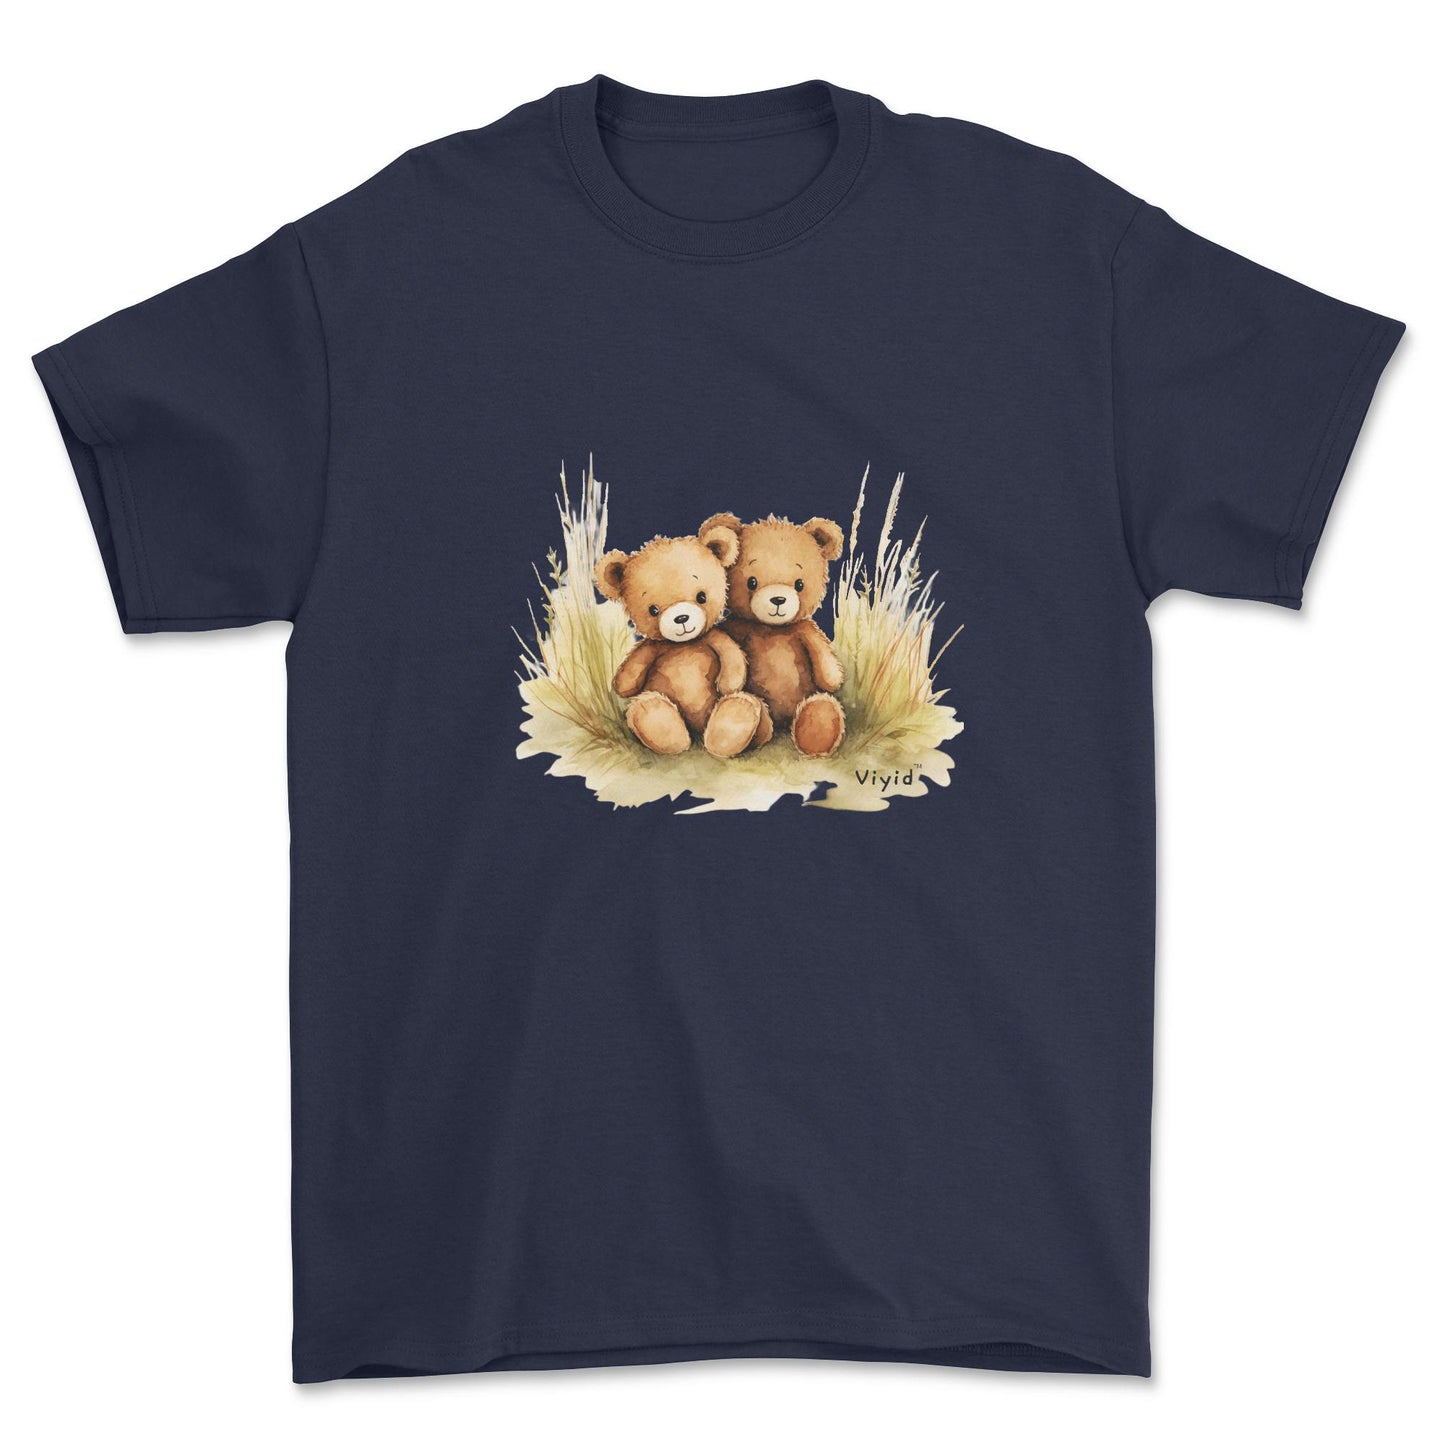 two bears adult t-shirt navy